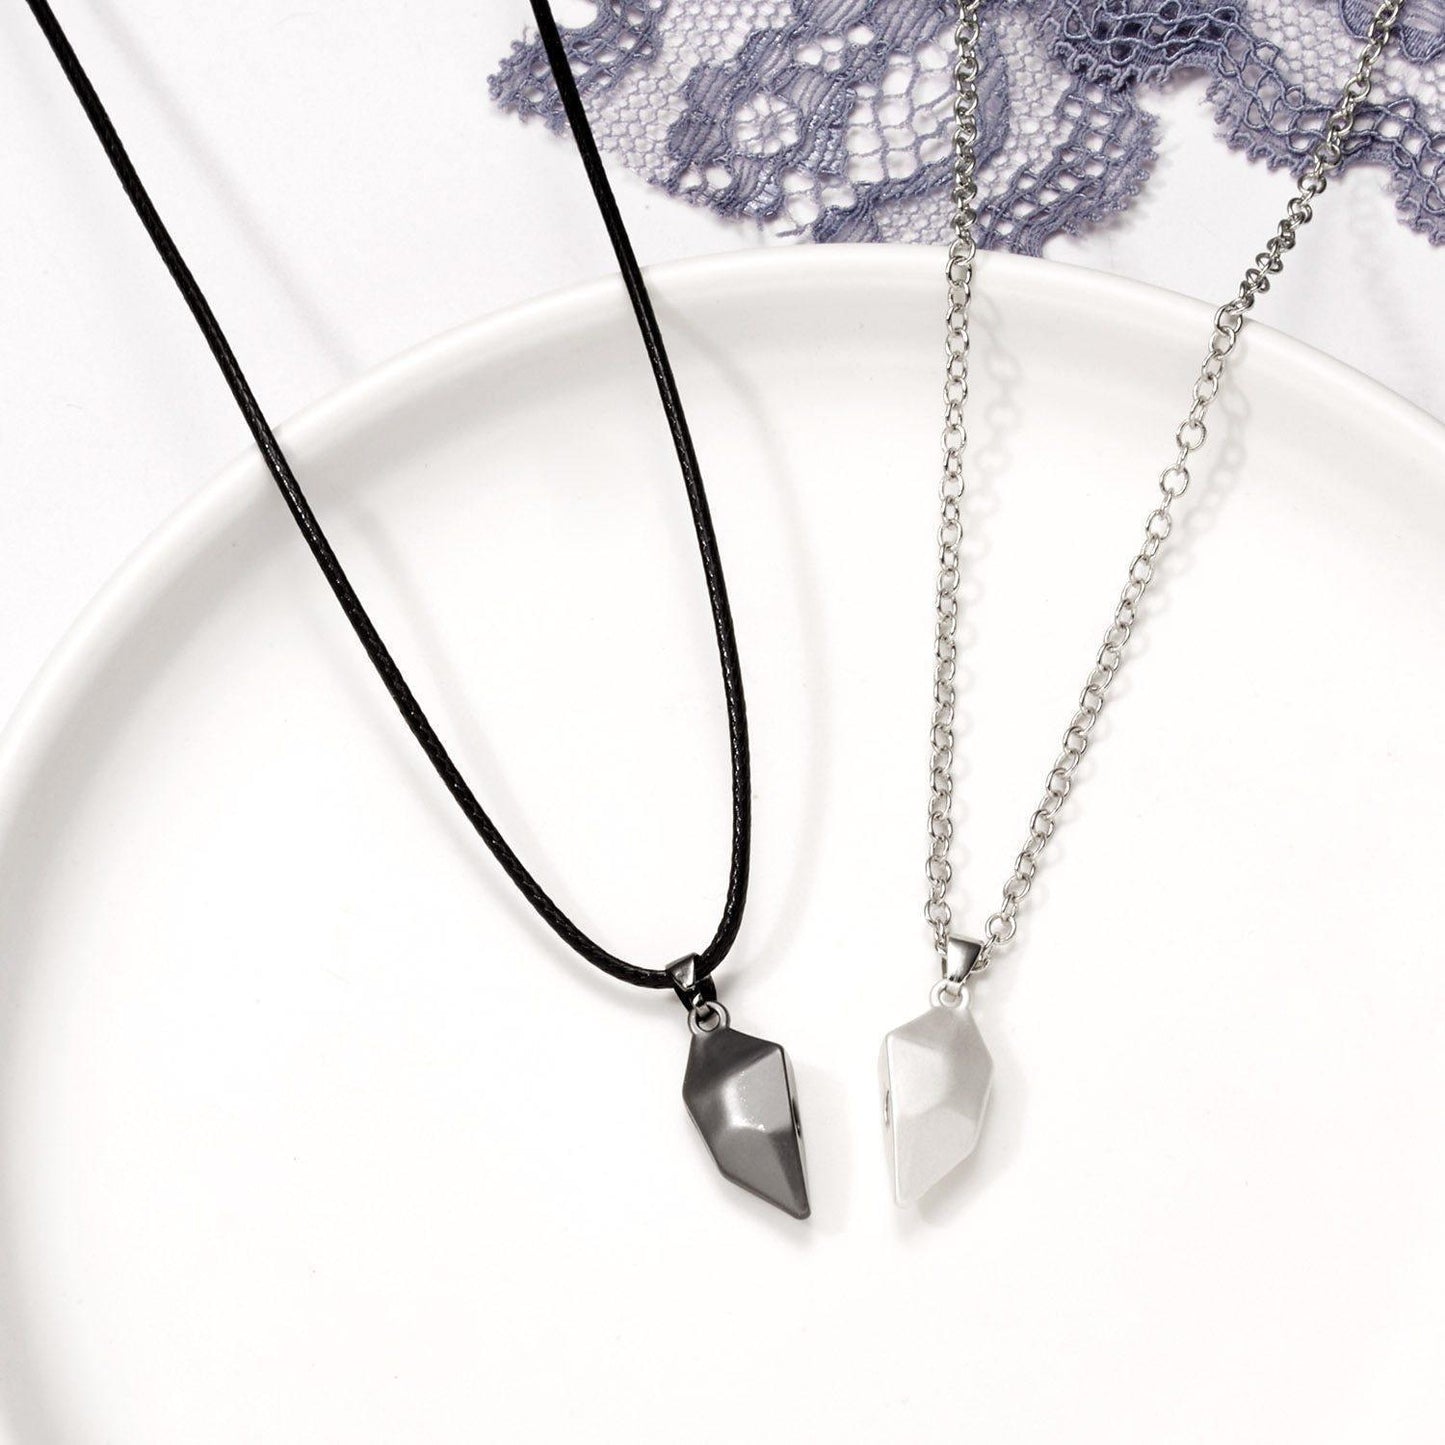 Magnetic Best Friend Necklace For 2 for Christmas 2023 | Magnetic Best Friend Necklace For 2 - undefined | best friend necklace for 2, best friend necklaces magnetic, Friendship Pendant Necklaces, gift ideas for Best Friends, Magnetic Friendship necklace, Magnetic heart Necklace, To My Best Friend Friendship Gift Necklace Set | From Hunny Life | hunnylife.com